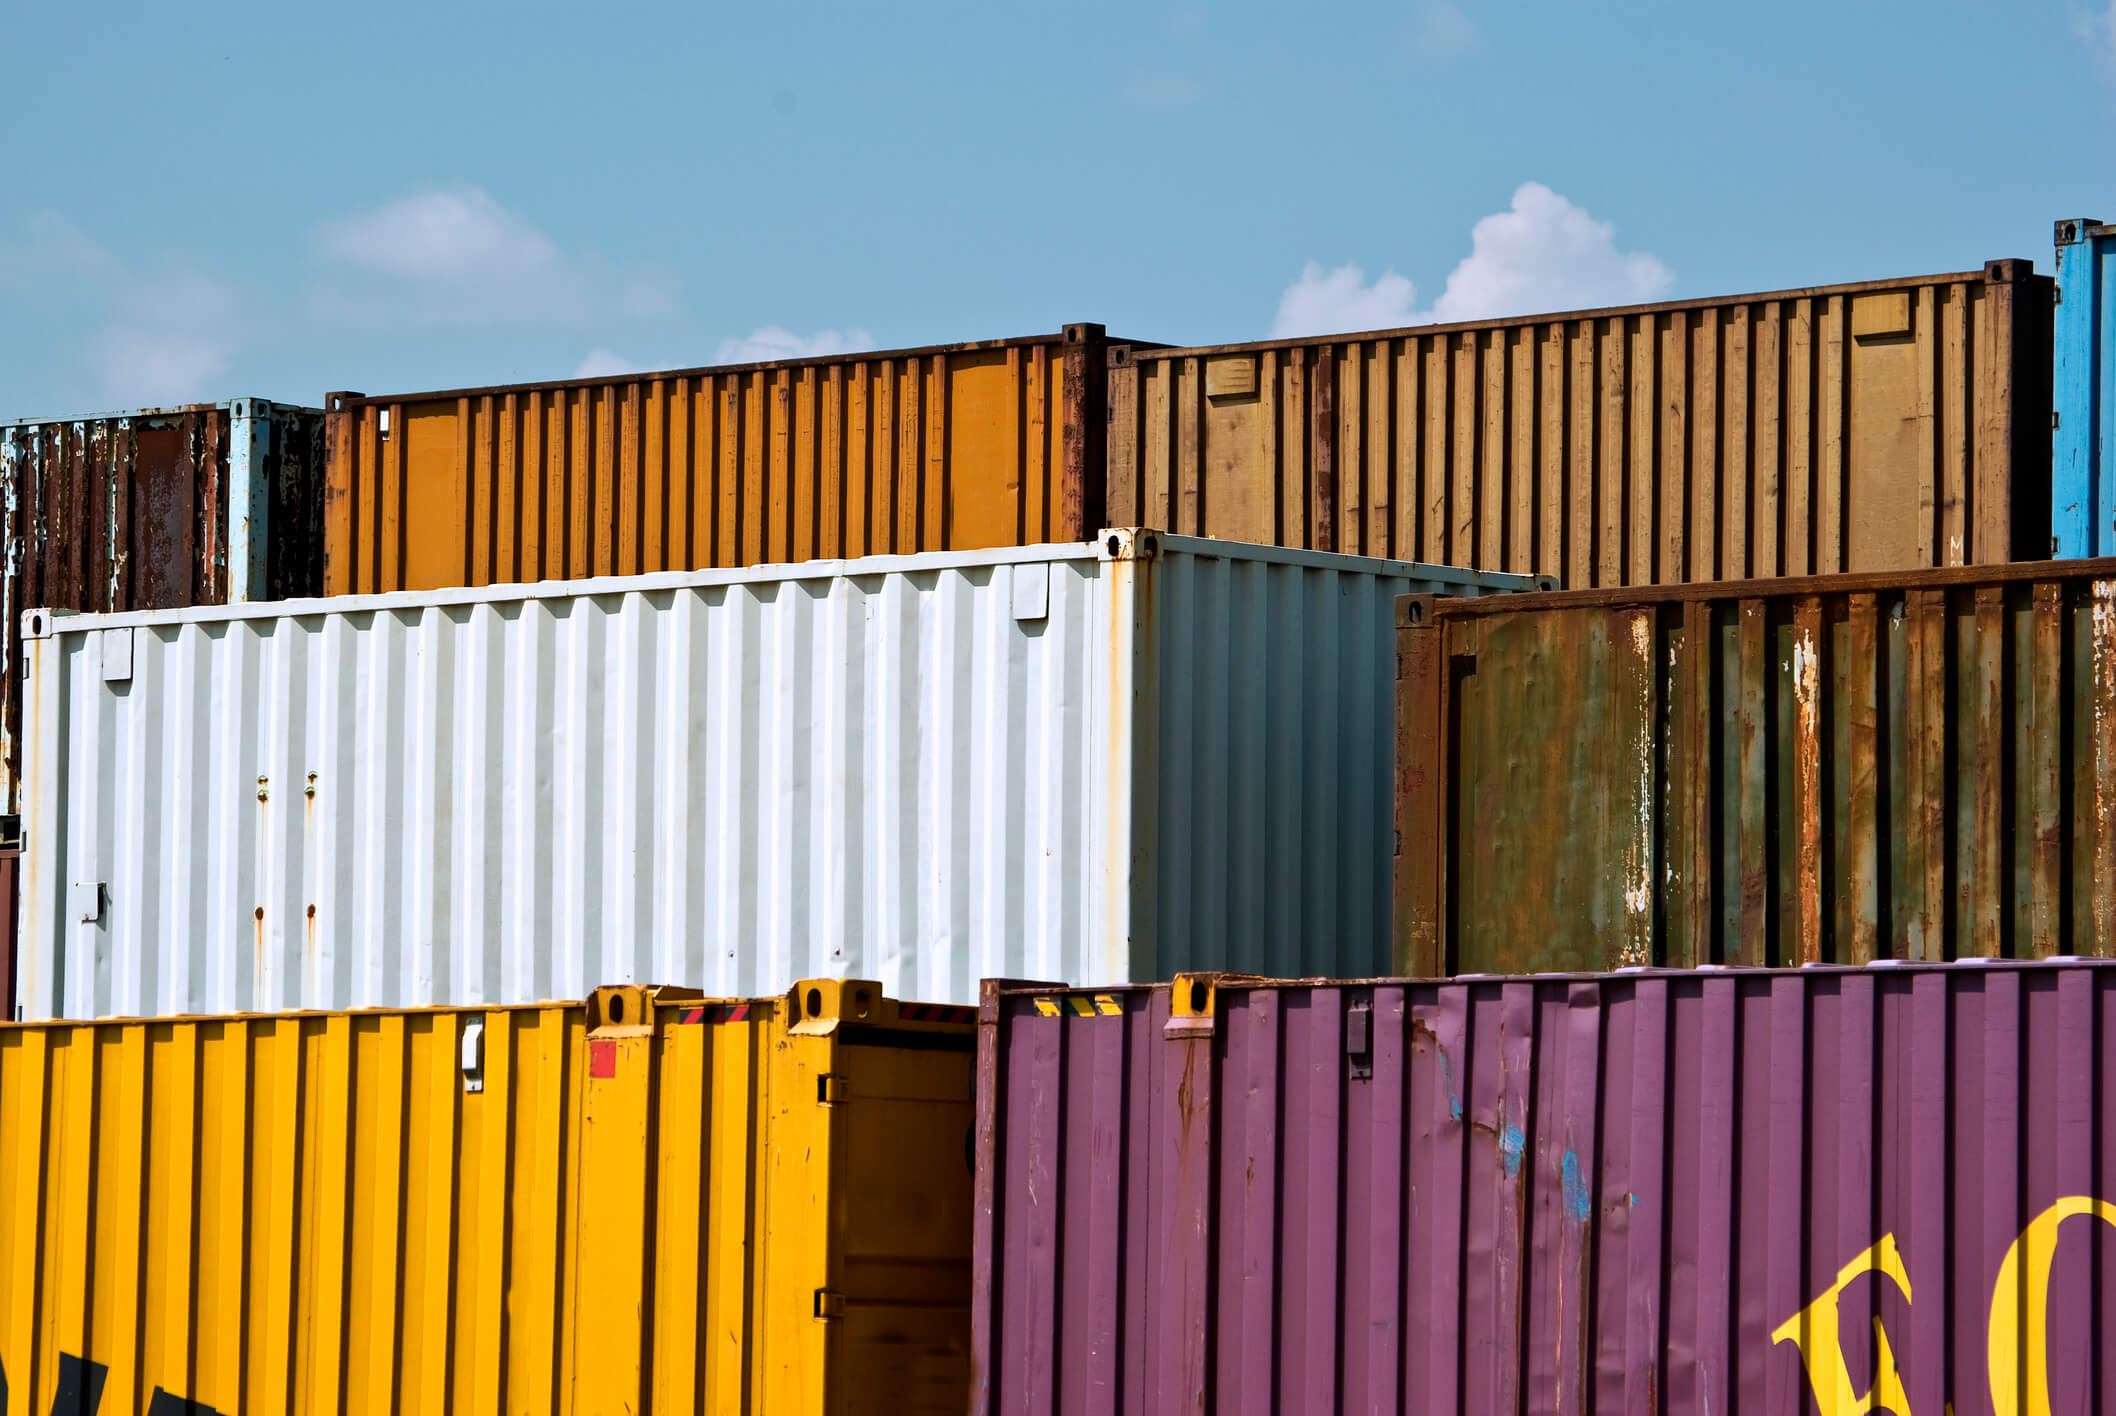 Freight containers stacked in various colors for shipping